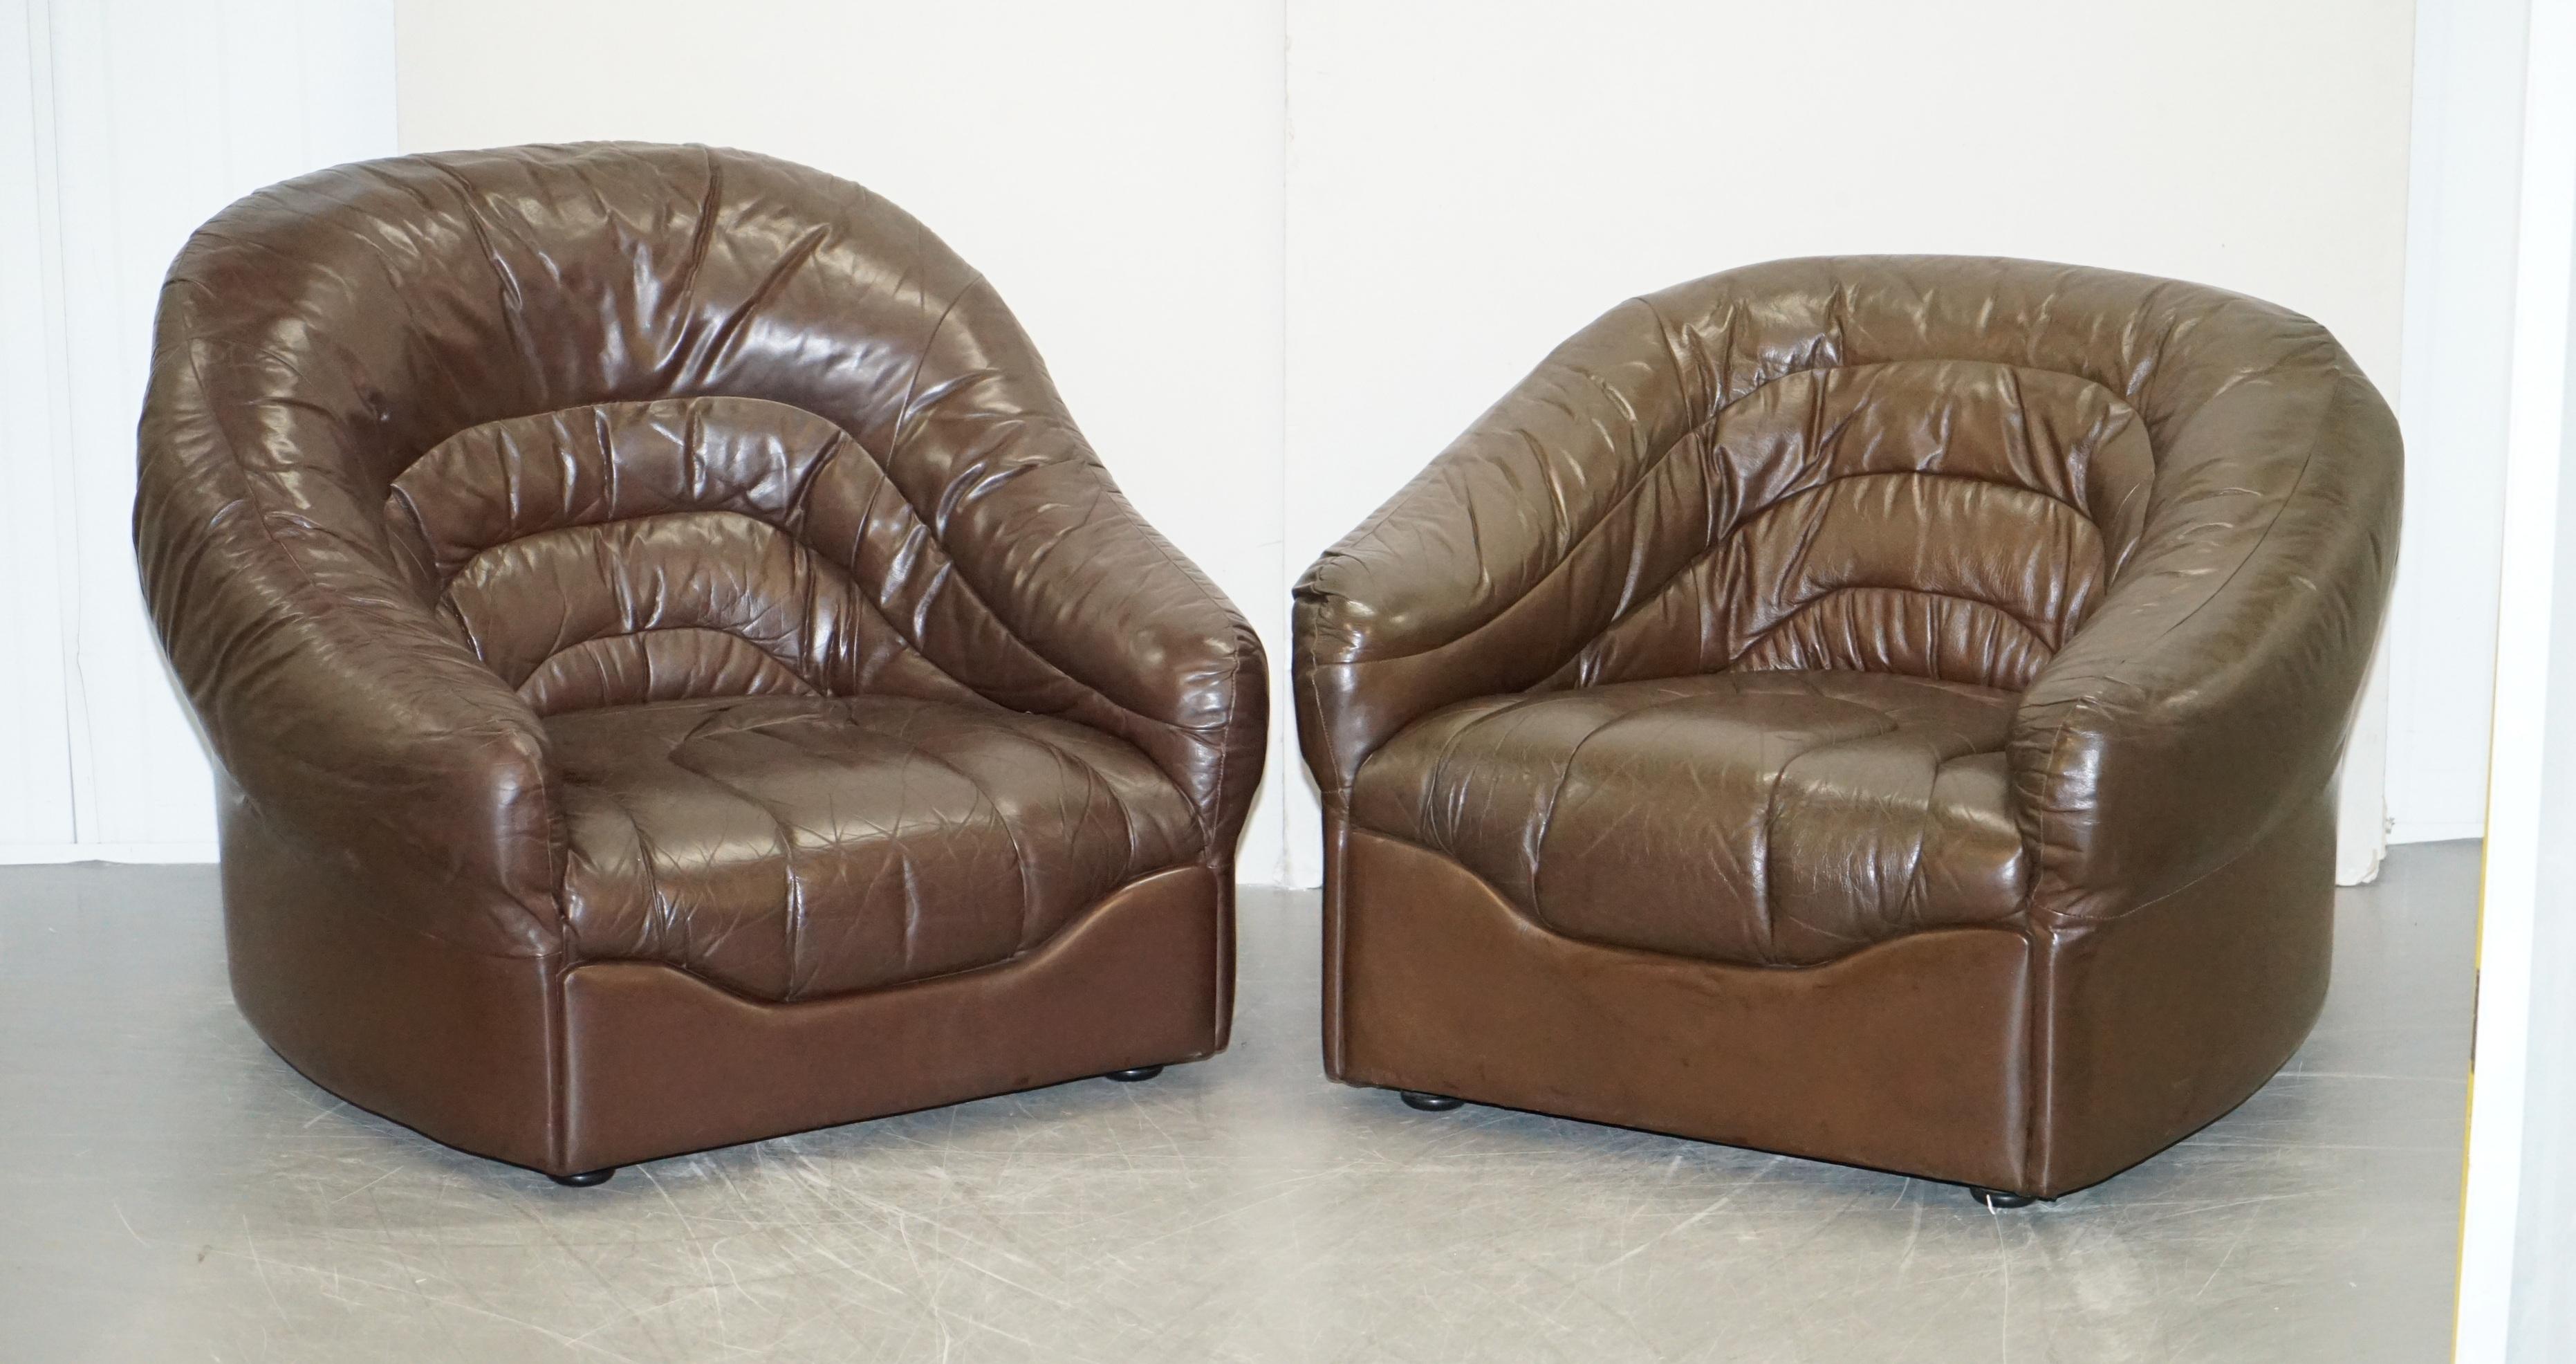 We are delighted to offer for sale this lovely vintage Mid-Century Modern suite of two his and hers armchairs with matching sofa in the Danish style

These are typical of Danish style leather seating, thick brown leather that’s super soft, dyed